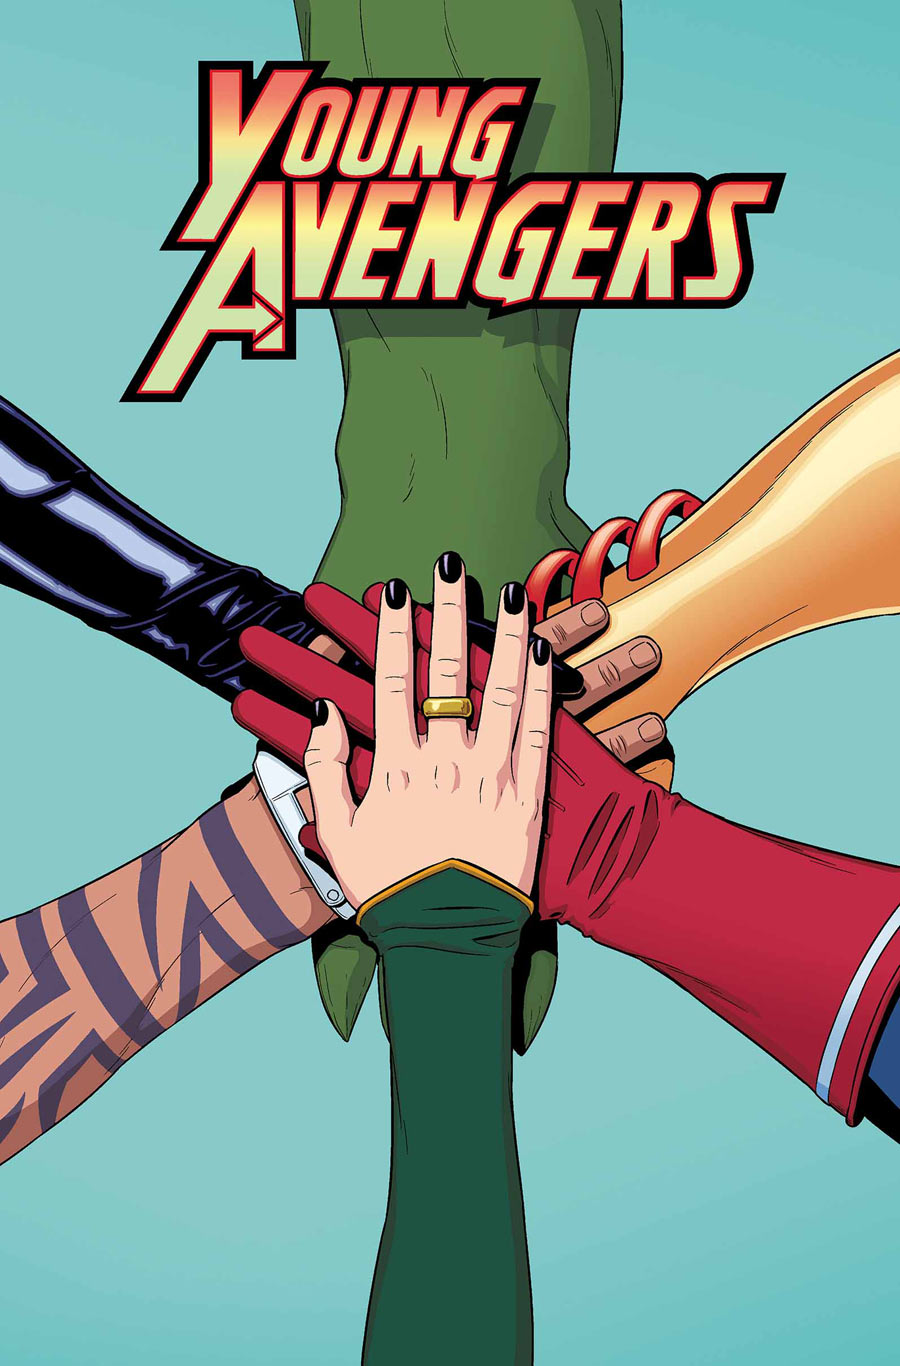 YOUNG AVENGERS ı↔ı WE'RE ALL IN THIS TOGETHER. - Page 2 Latest?cb=20130818100405